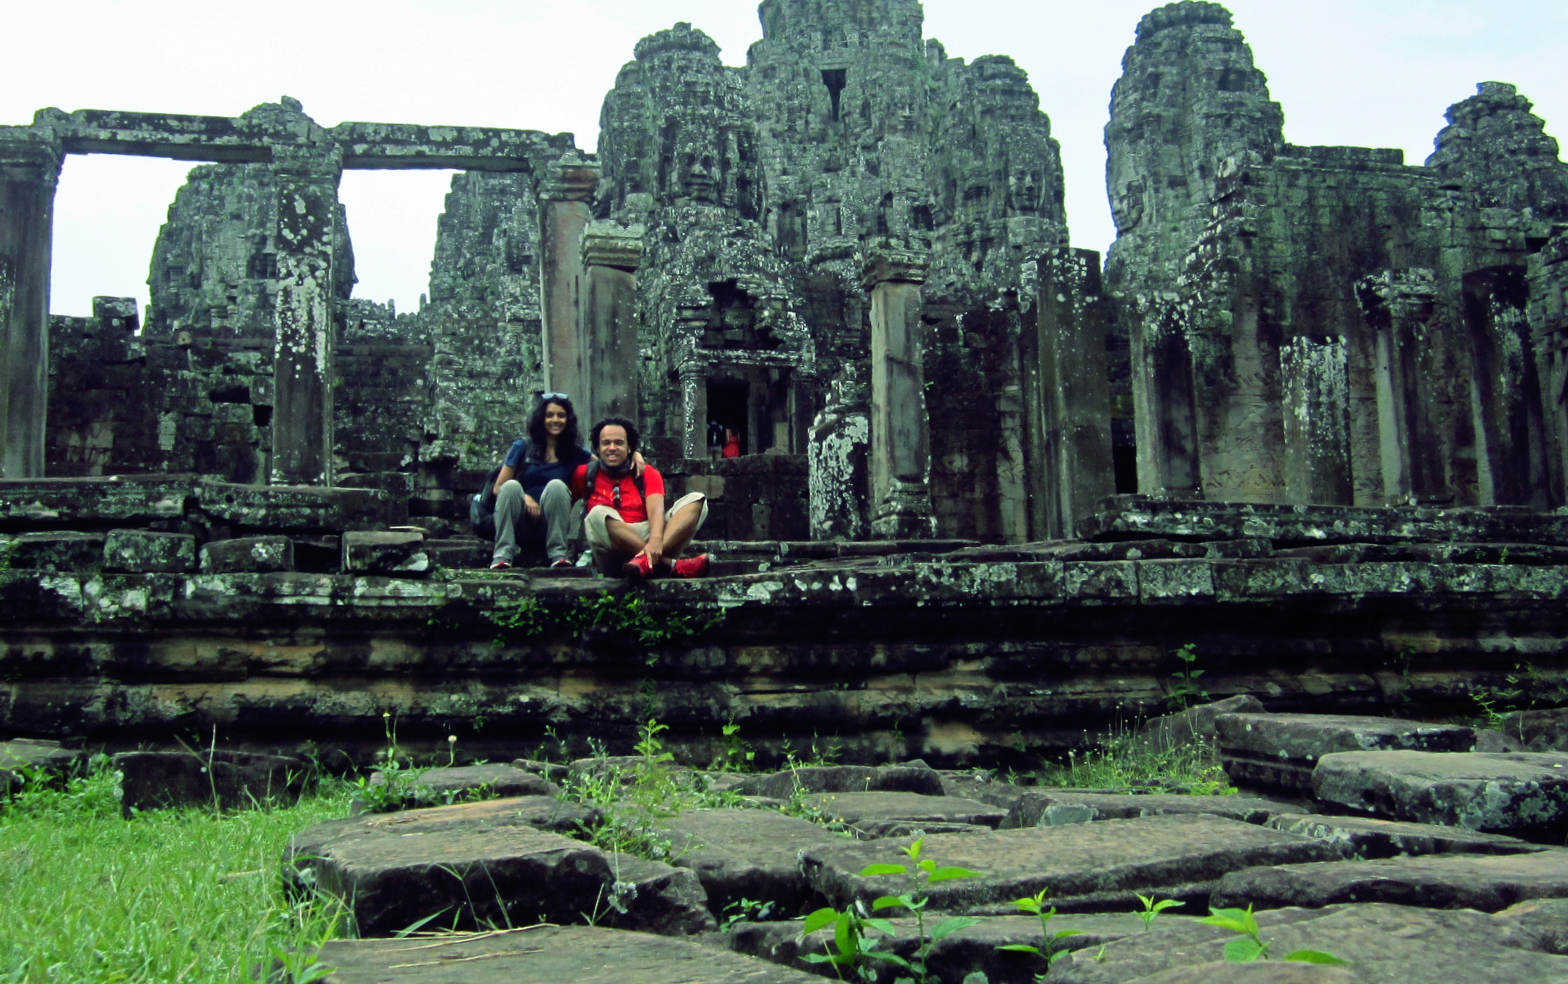 Outside the Bayon complex